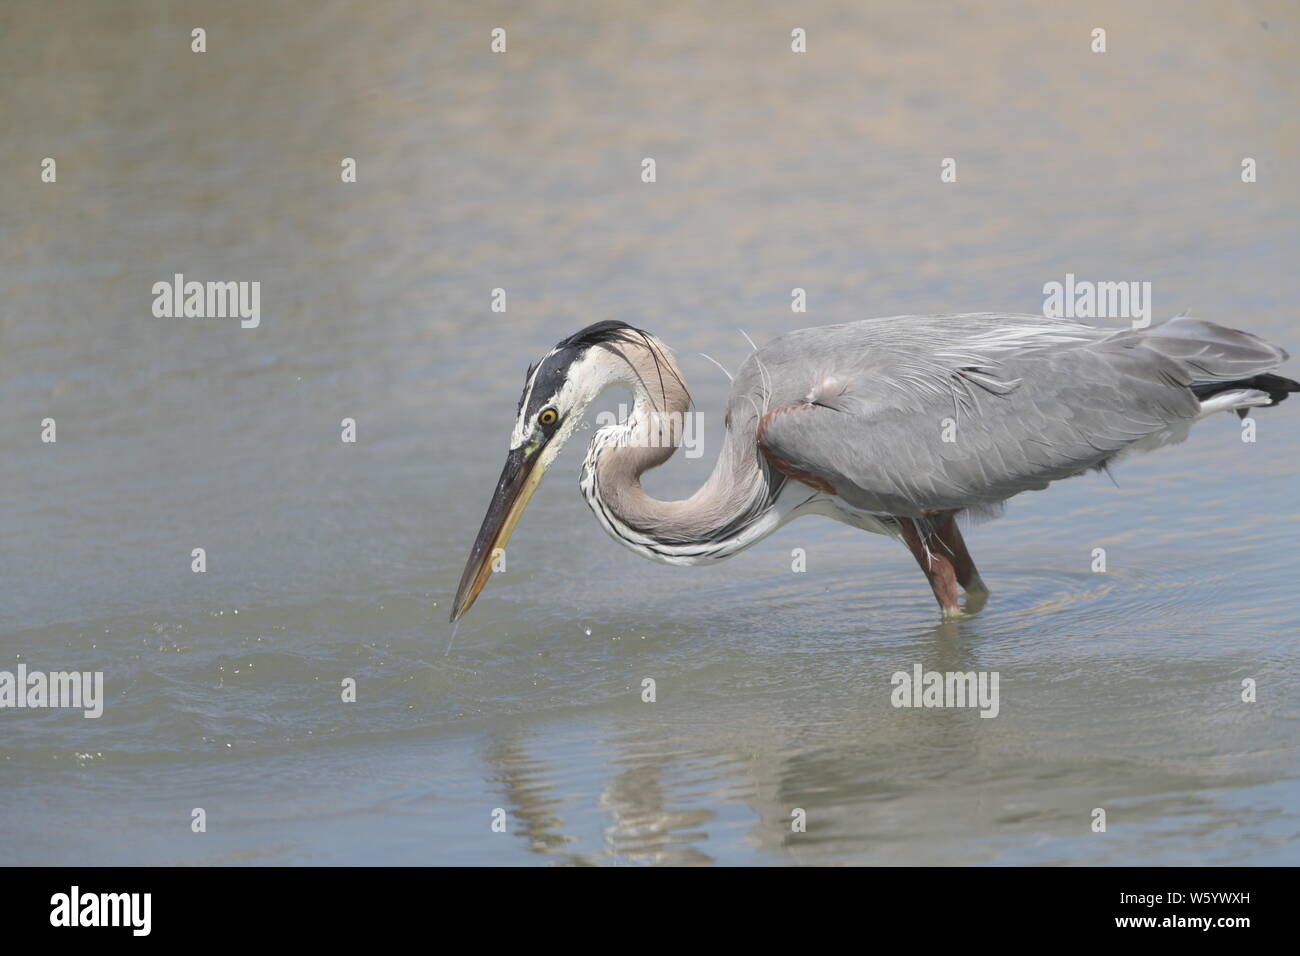 A bird called Gray Heron, Ardea cinerea, searches for food in the salt water from the sea towards the Kino Viejo estuary. The gray heron or air—n is a species of bird of the Ardeidae family of Eurasia and Africa, a slender and large aquatic bird with long neck and legs, with mainly gray plumage. It inhabits rivers, lakes and all kinds of freshwater and brackish wetlands. (Photo: Luis Gutierrez / NortePhoto)  Un ave llamada Garza gris, Ardea cinerea,  busca alimento en el agua salada proveniente del mar hacia el estero de Kino Viejo.  La garza real ? o air—n? es una especie de ave pelecaniforme Stock Photo